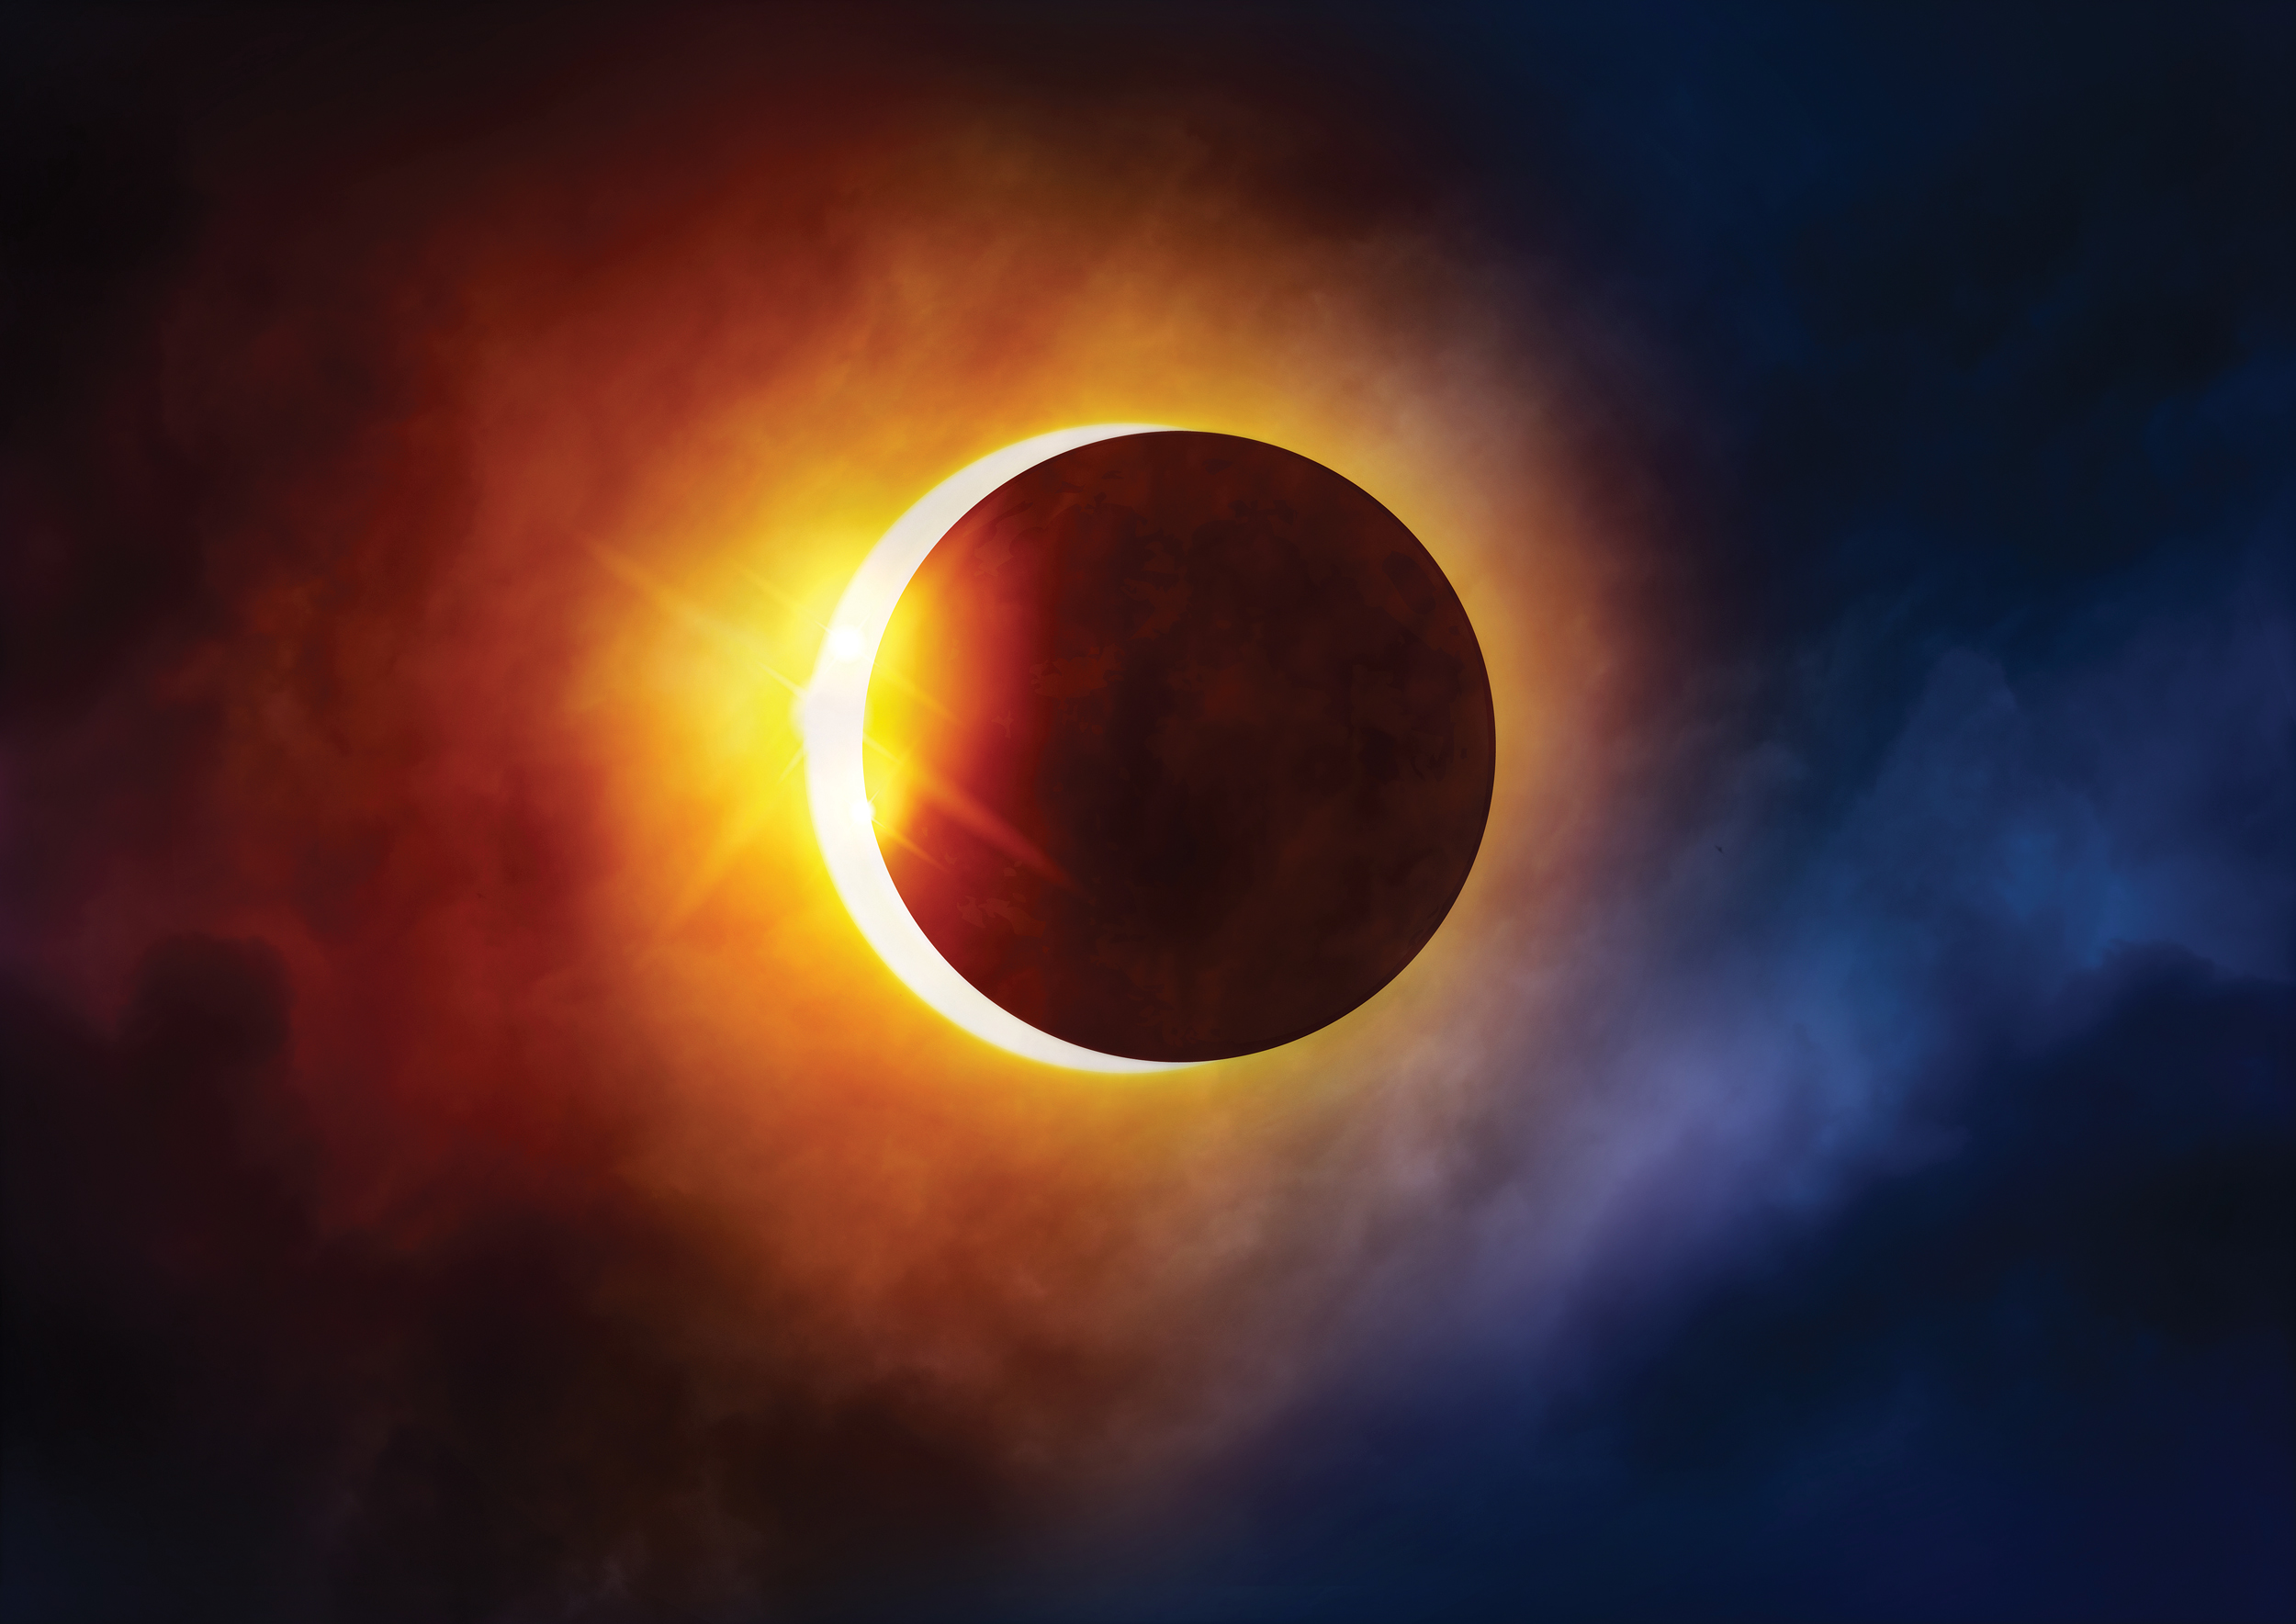 When the solar eclipse occurs April 8, parts of Pennsylvania, including Crawford, Erie, Mercer and Warren counties, will be in the 115-milewide totality zone.